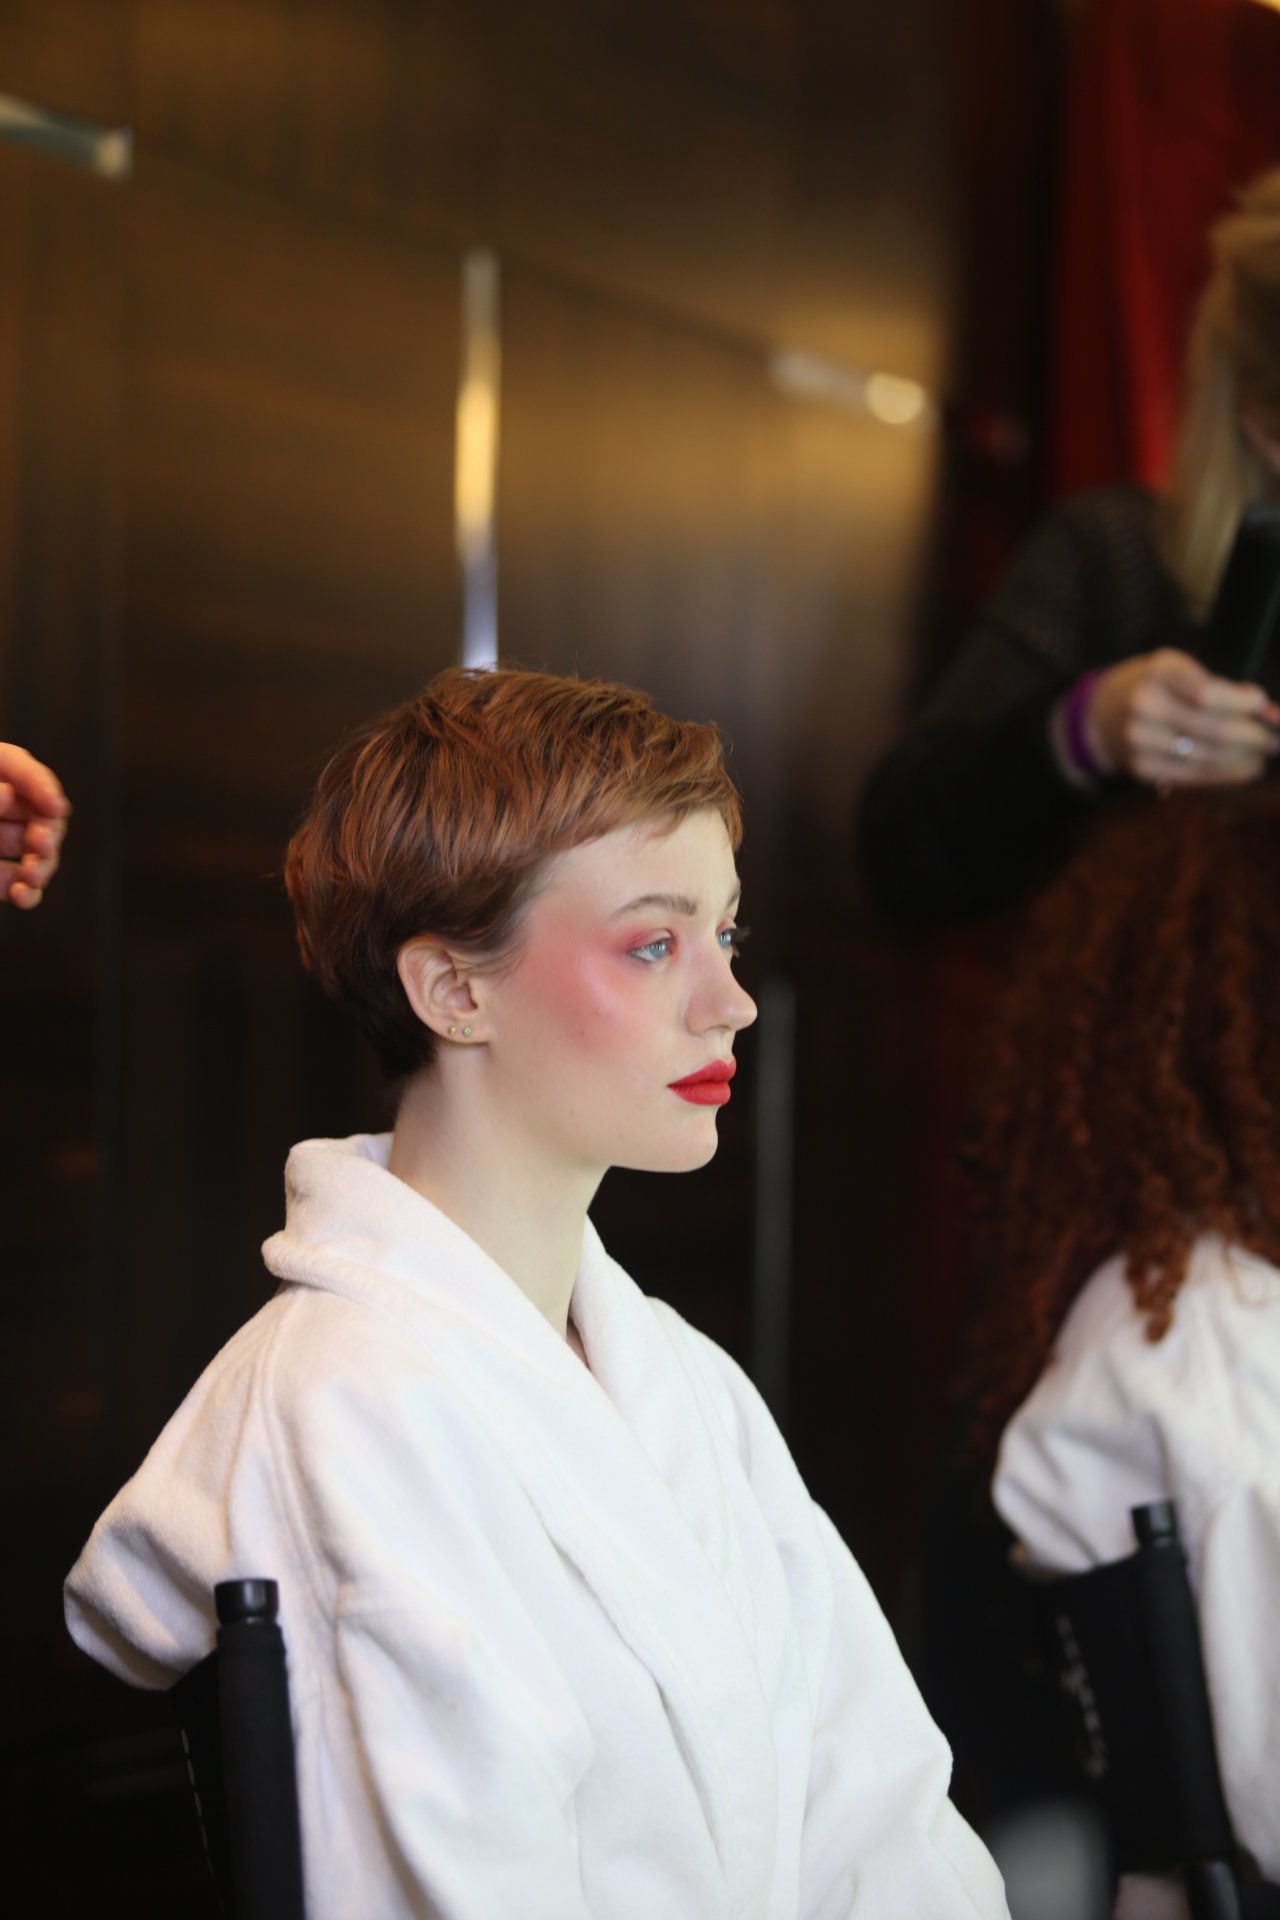 Backstage beauty at London Fashion Week: Bobbi Brown for Lulu Guinness shows us how to pull off a dewy blush. 